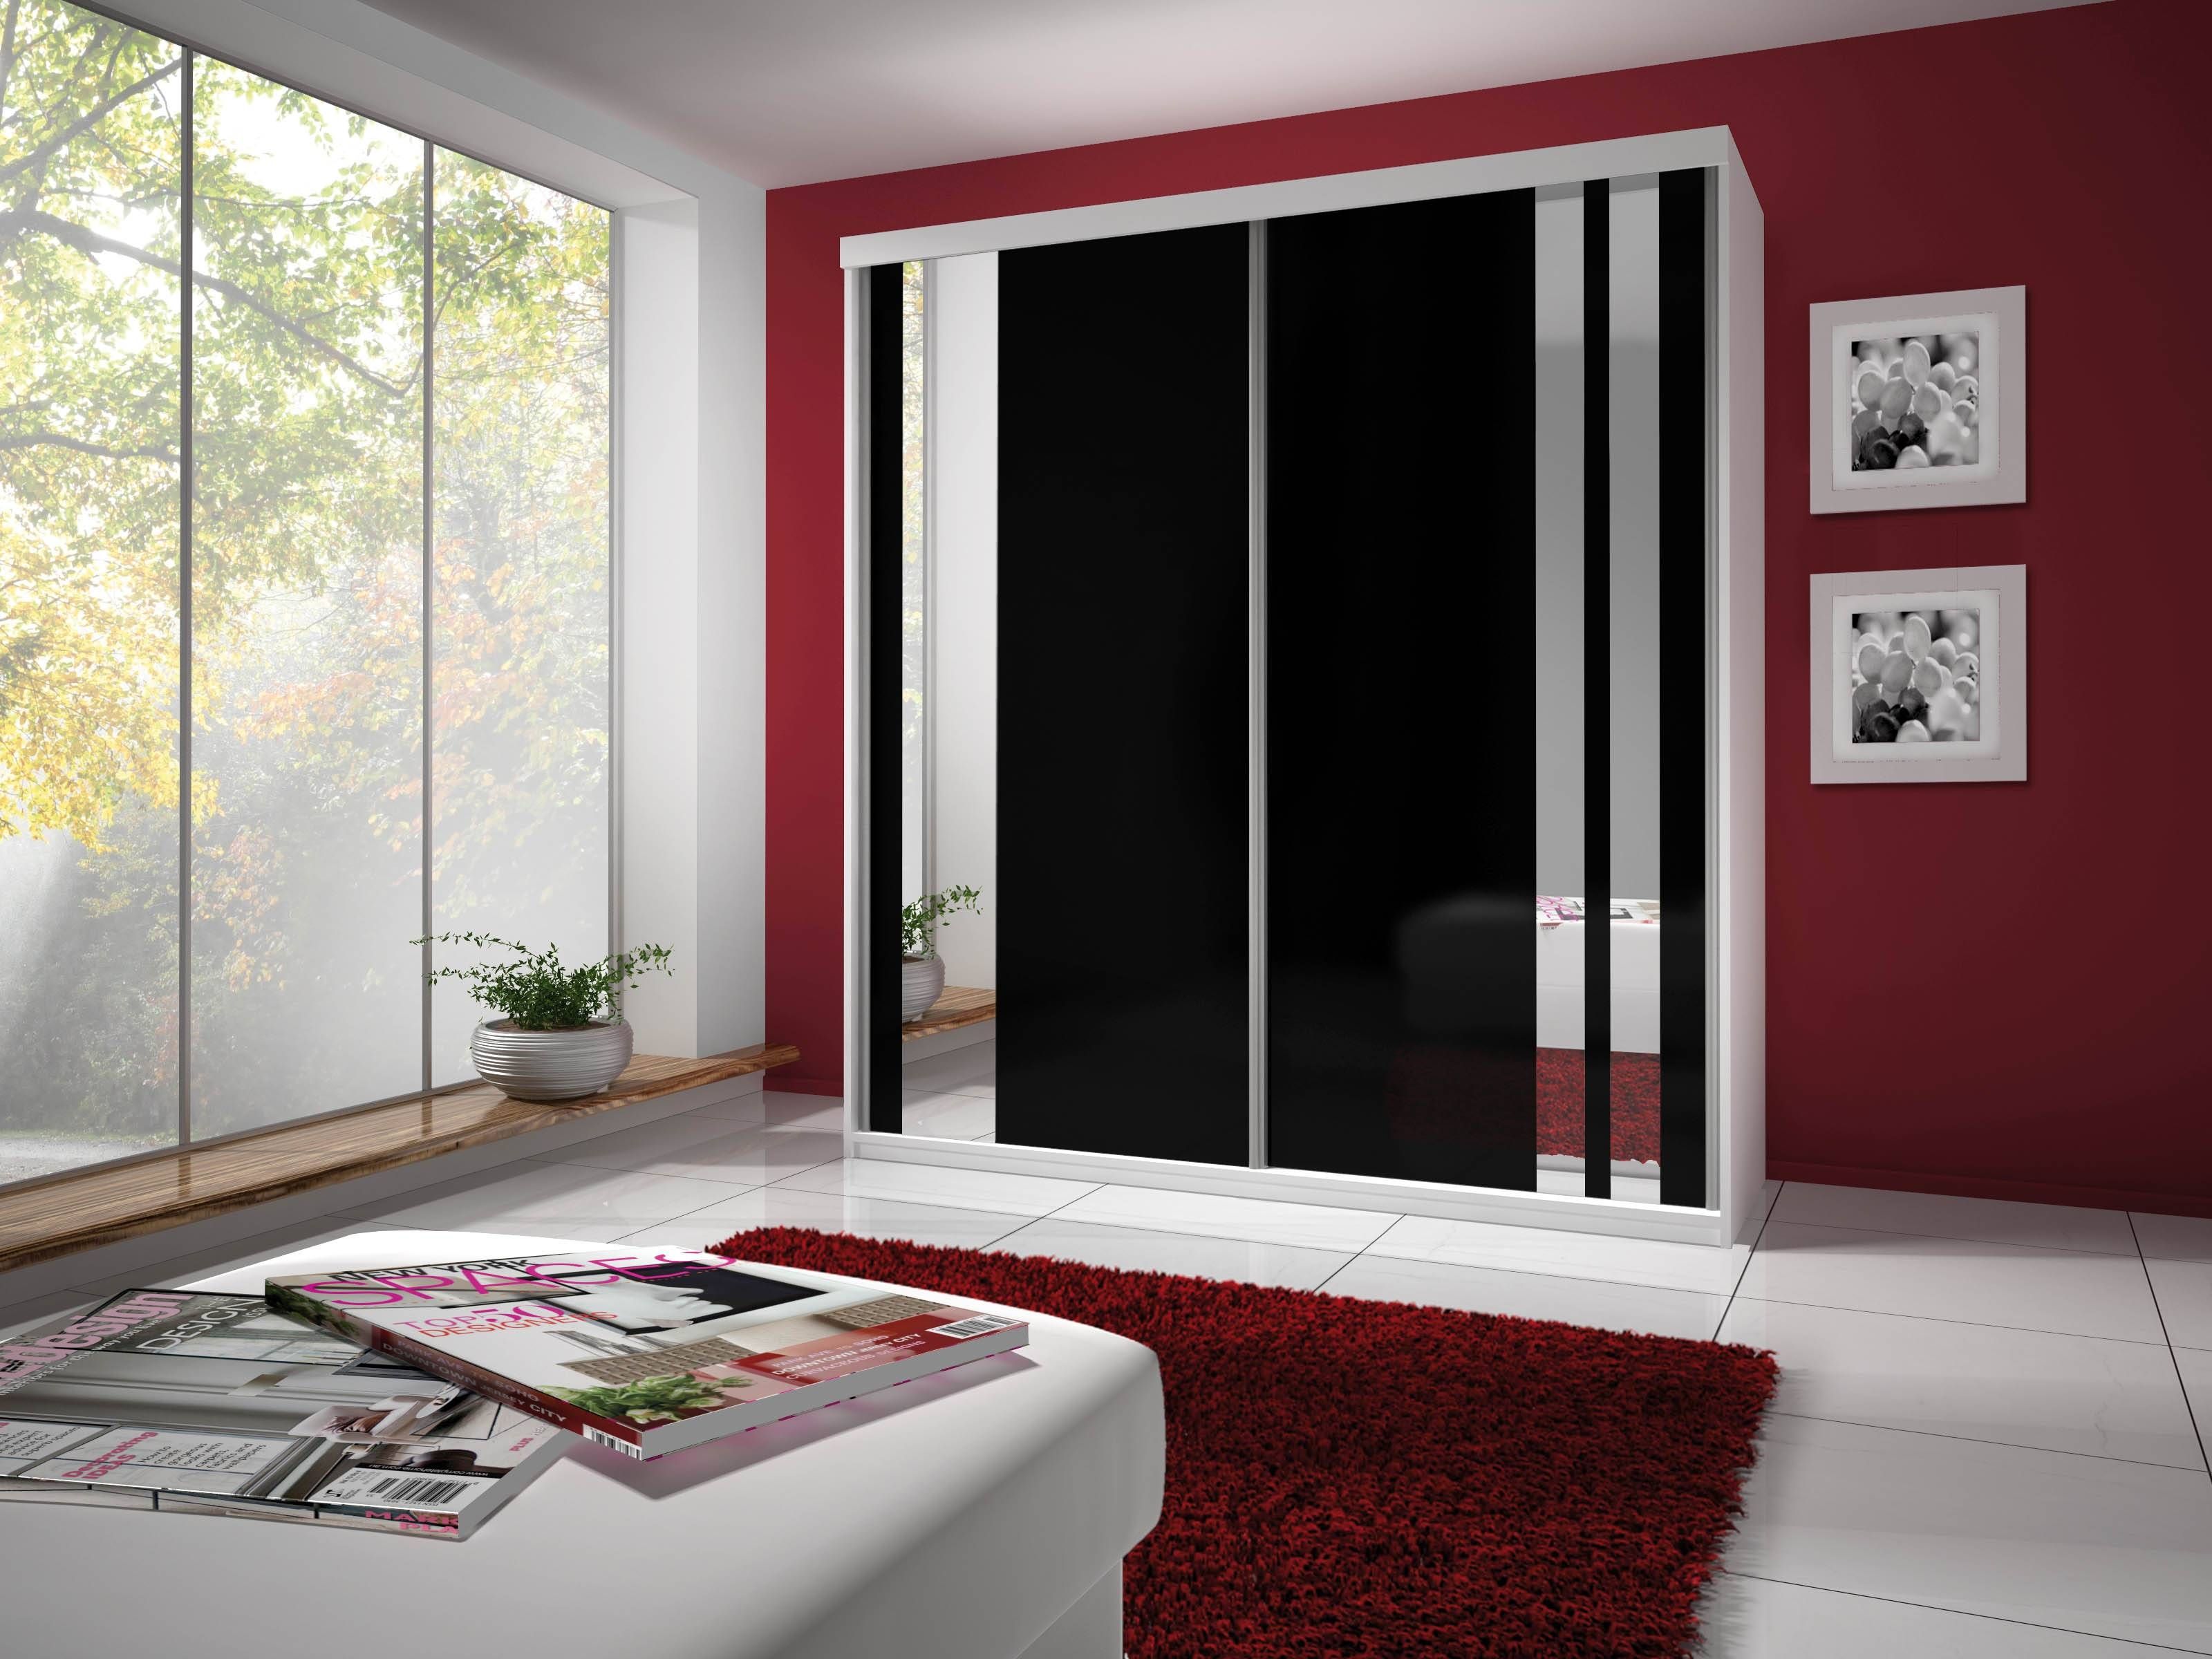 Brand New Modern 2 Door Sliding Wardrobe With Mirror Hanging Rail Throughout Wardrobes With Mirror (View 9 of 15)